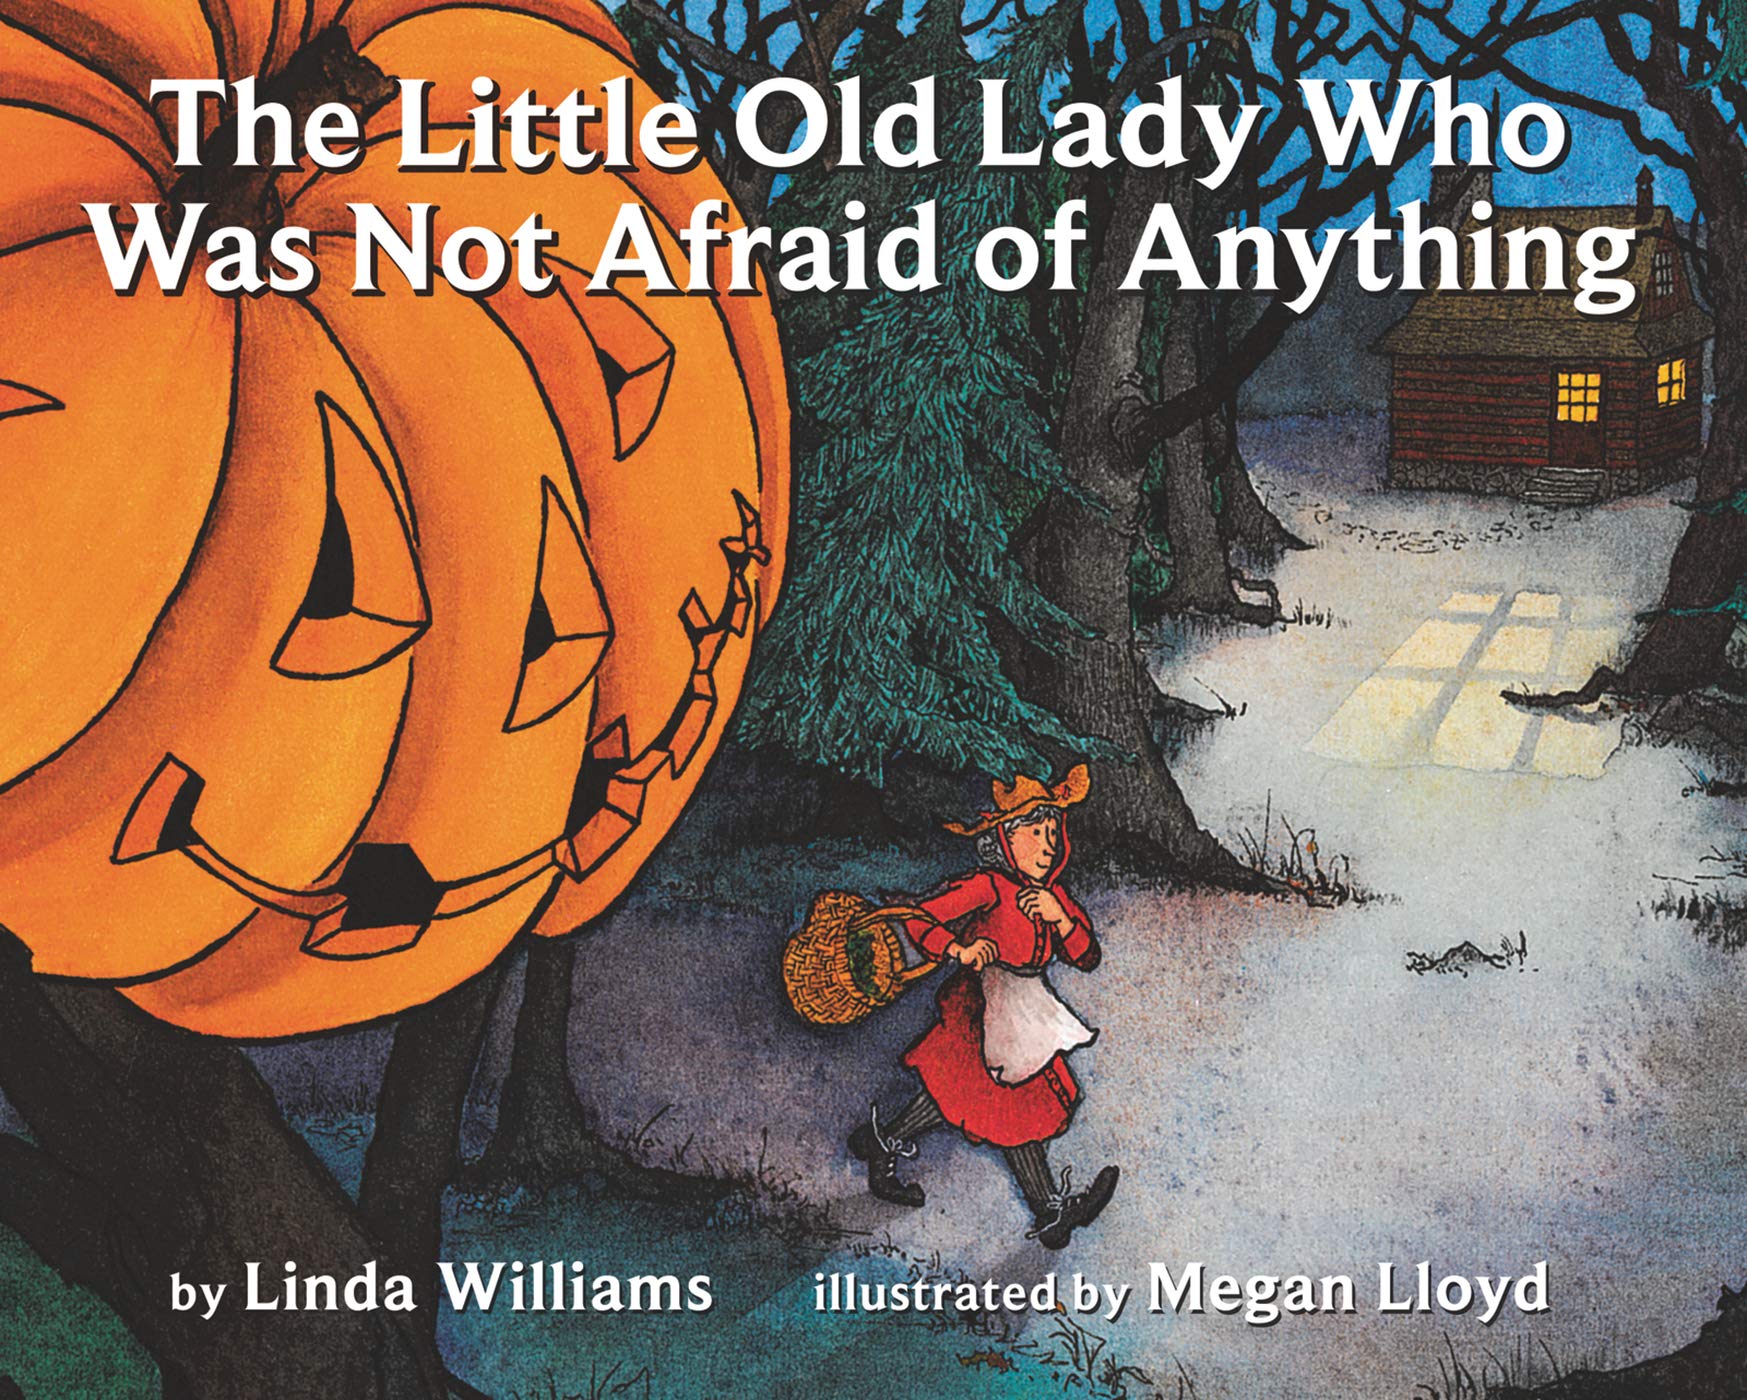 Image of "The Little Old Lady Who Was Not Afraid of Anything"